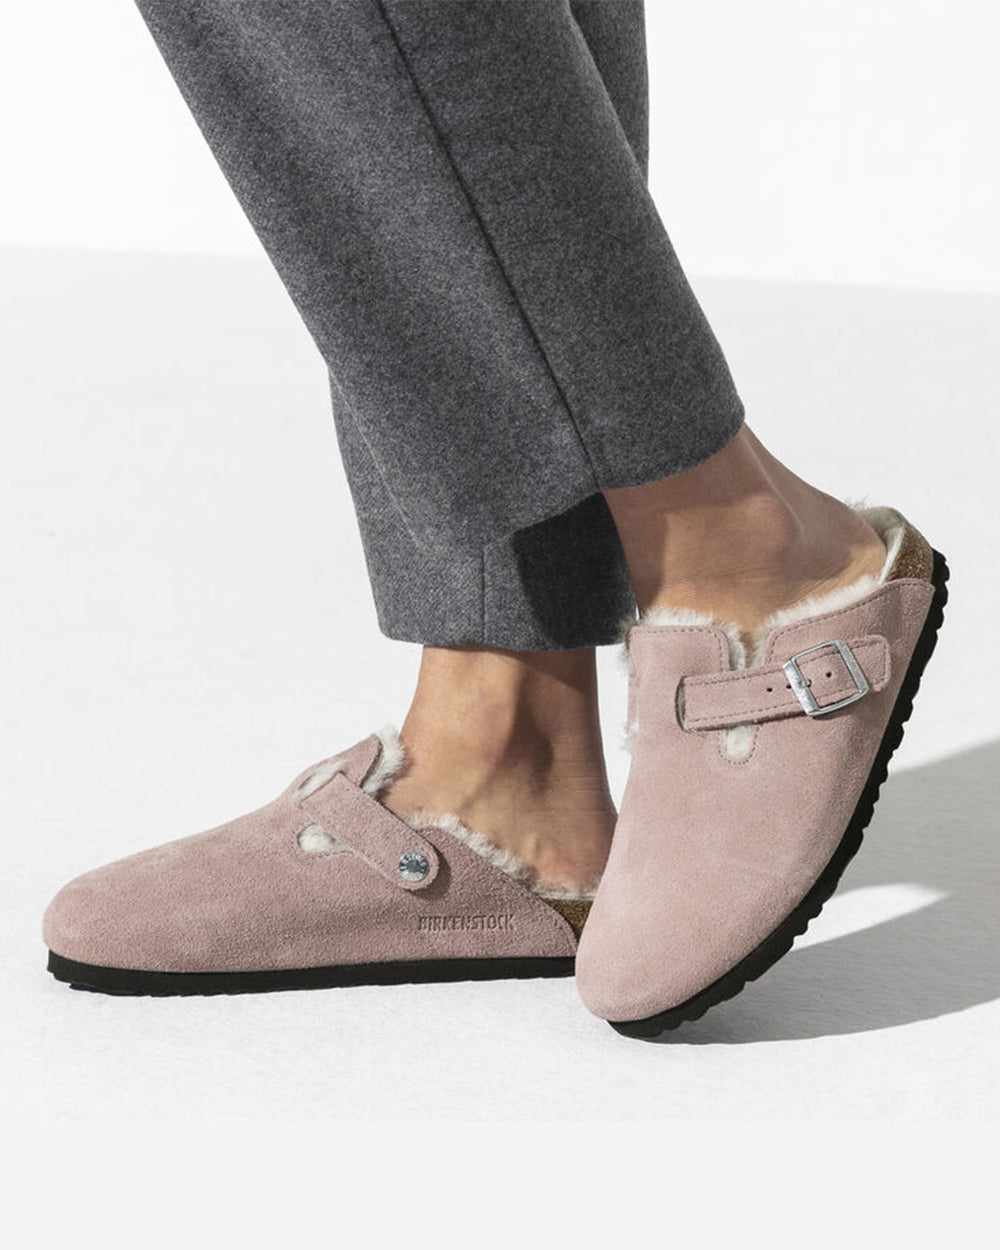 Birkenstock Boston Shearling Shoes Are the Best Slip-Ons